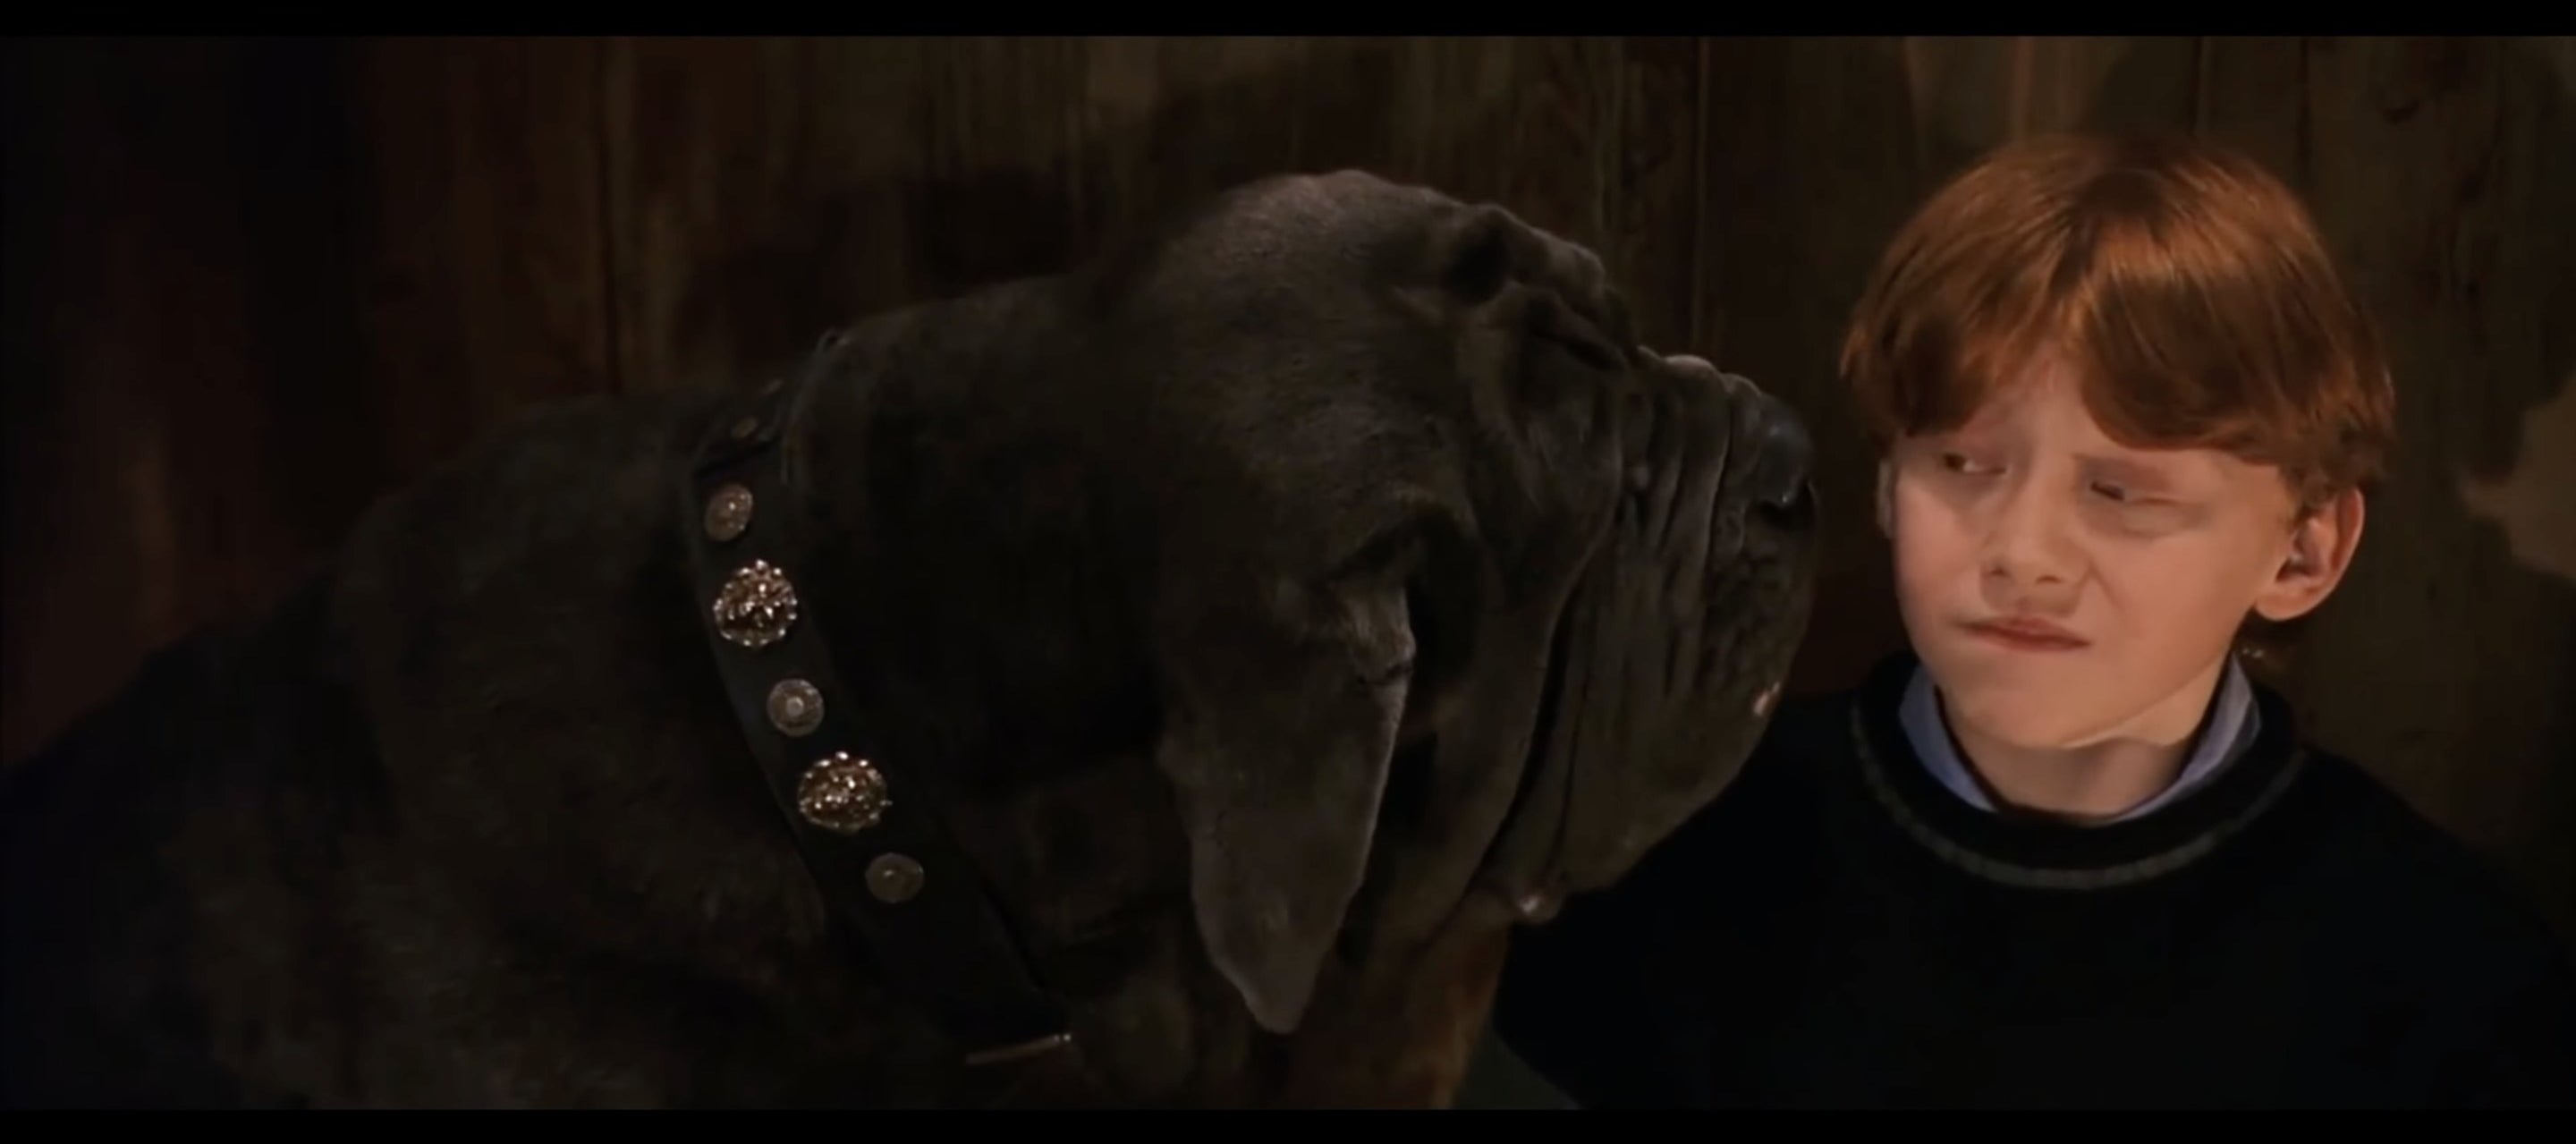 Ron Weasley being licked by a dog